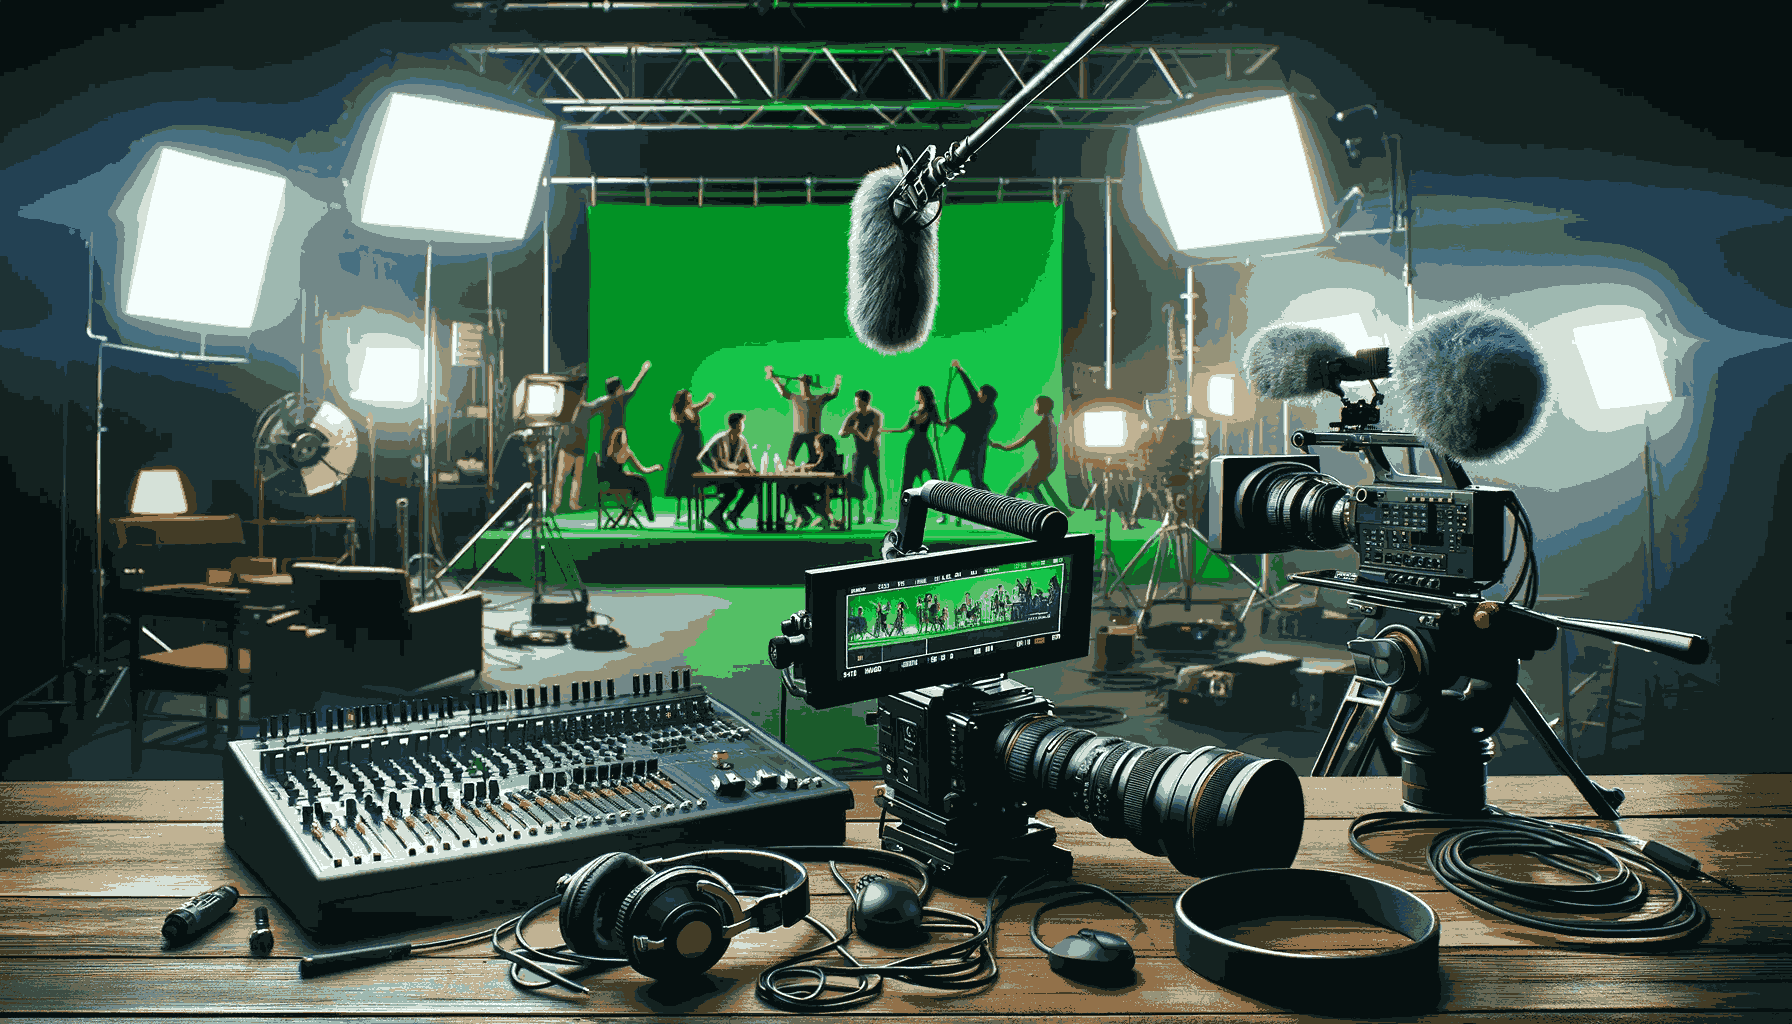 A professional film set featuring a high-quality video camera on a tripod, a dynamic movie scene with actors in front of a green screen, and headphones on a nearby table.